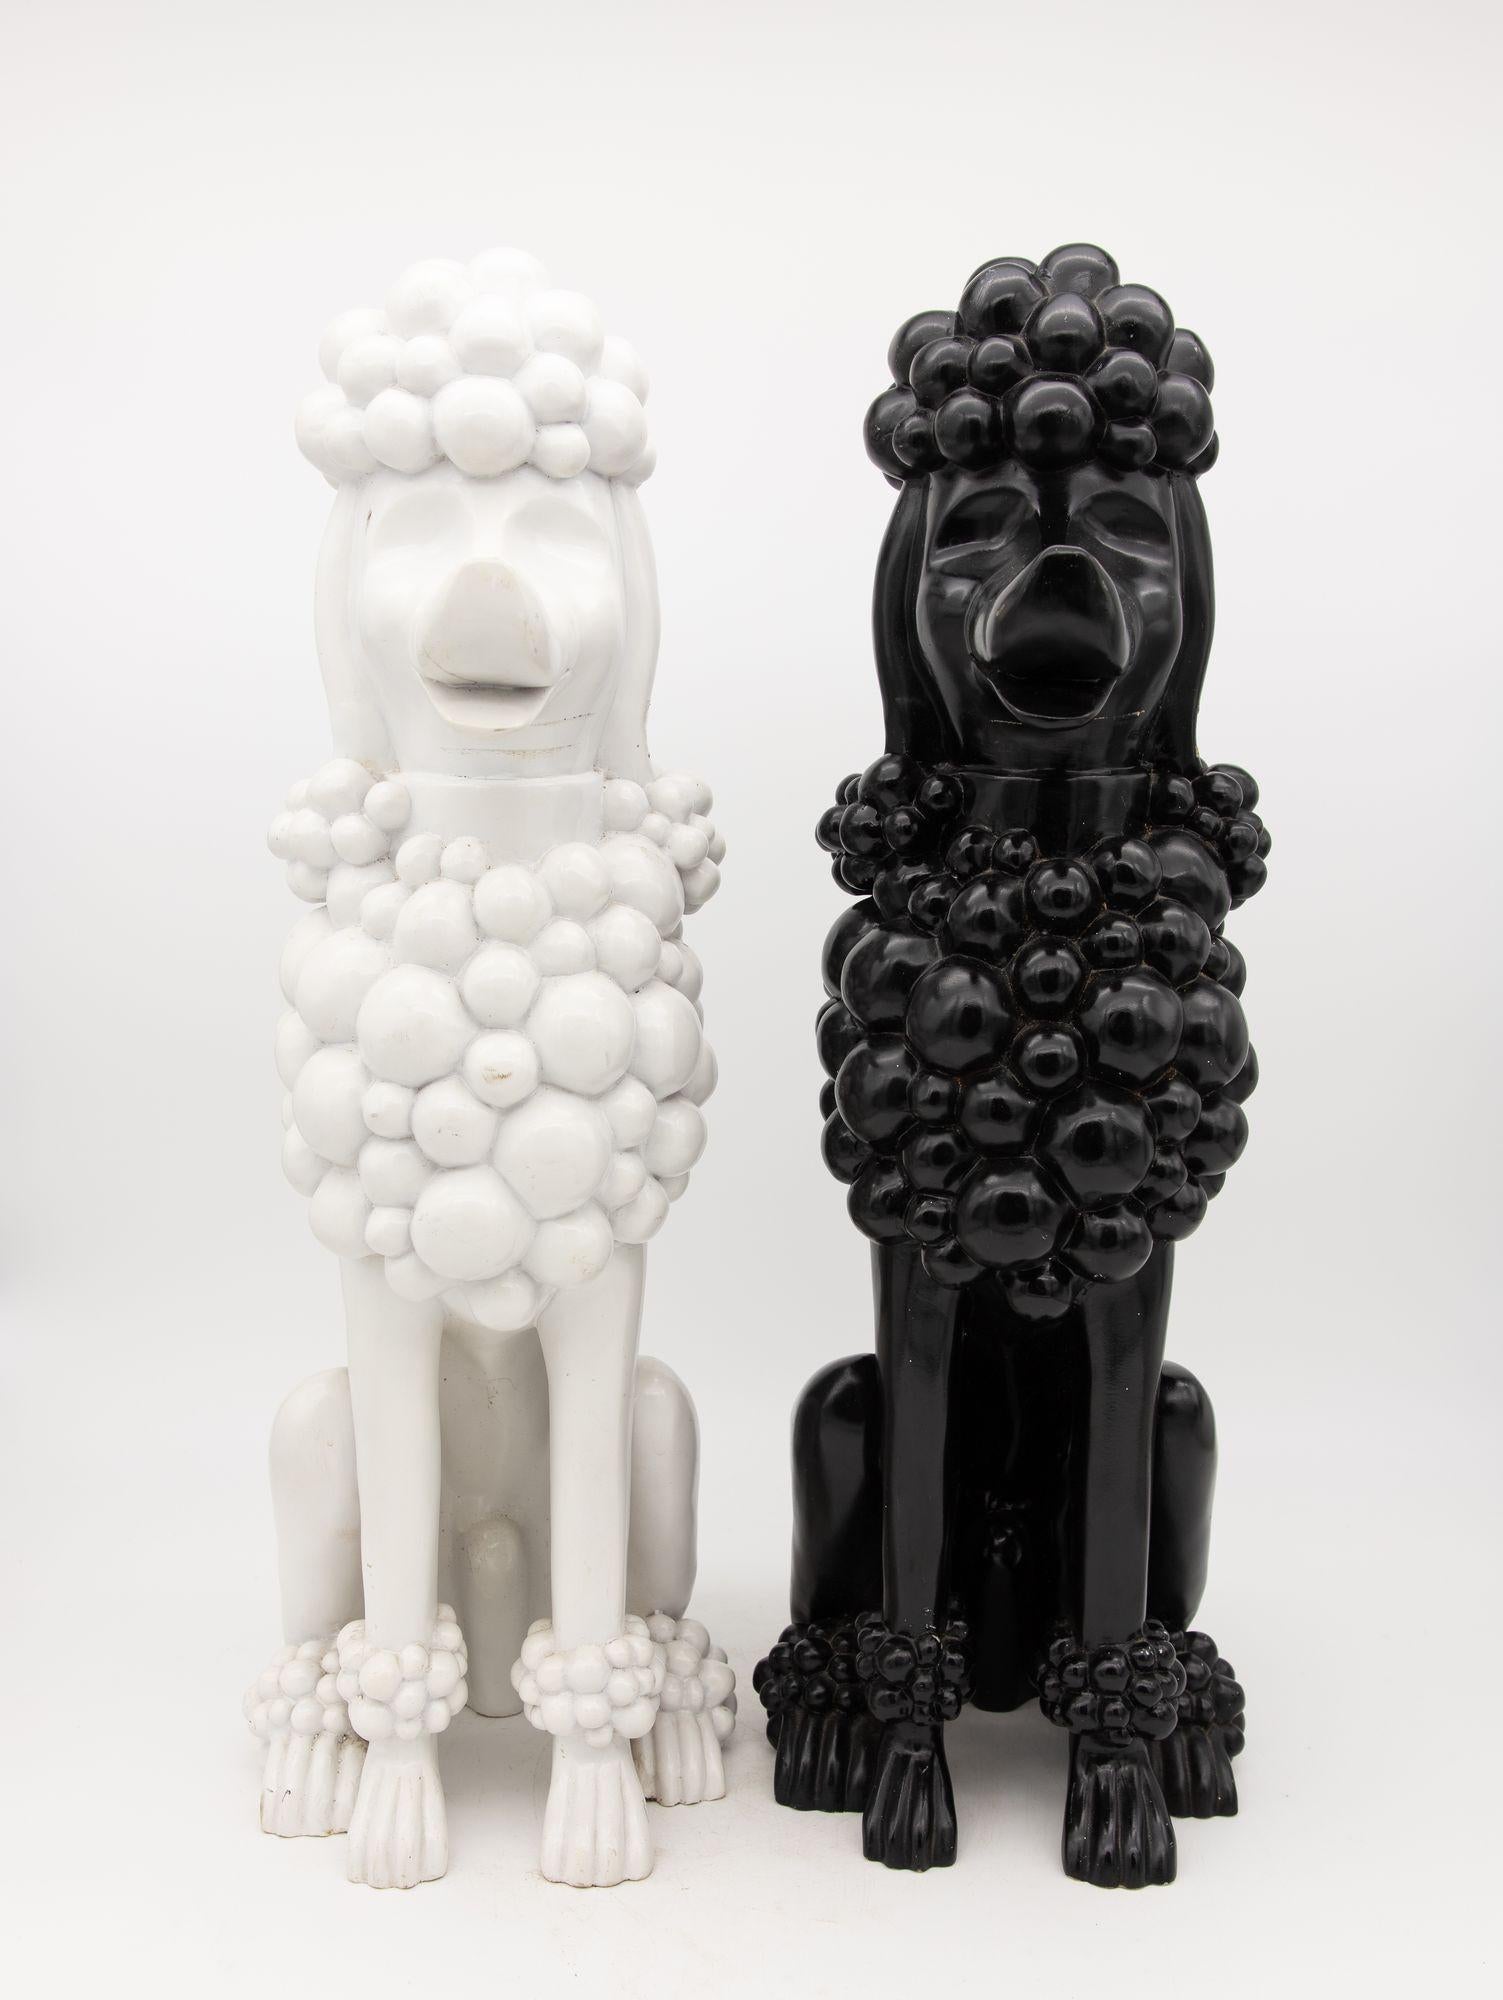 A delightful duo of composite lifesize Poodles, one ebony and one snowy white! Likely advertising models, these enchanting sculptures radiate charm and joy with their endearing and cheerful expressions. Crafted with exquisite attention to detail,